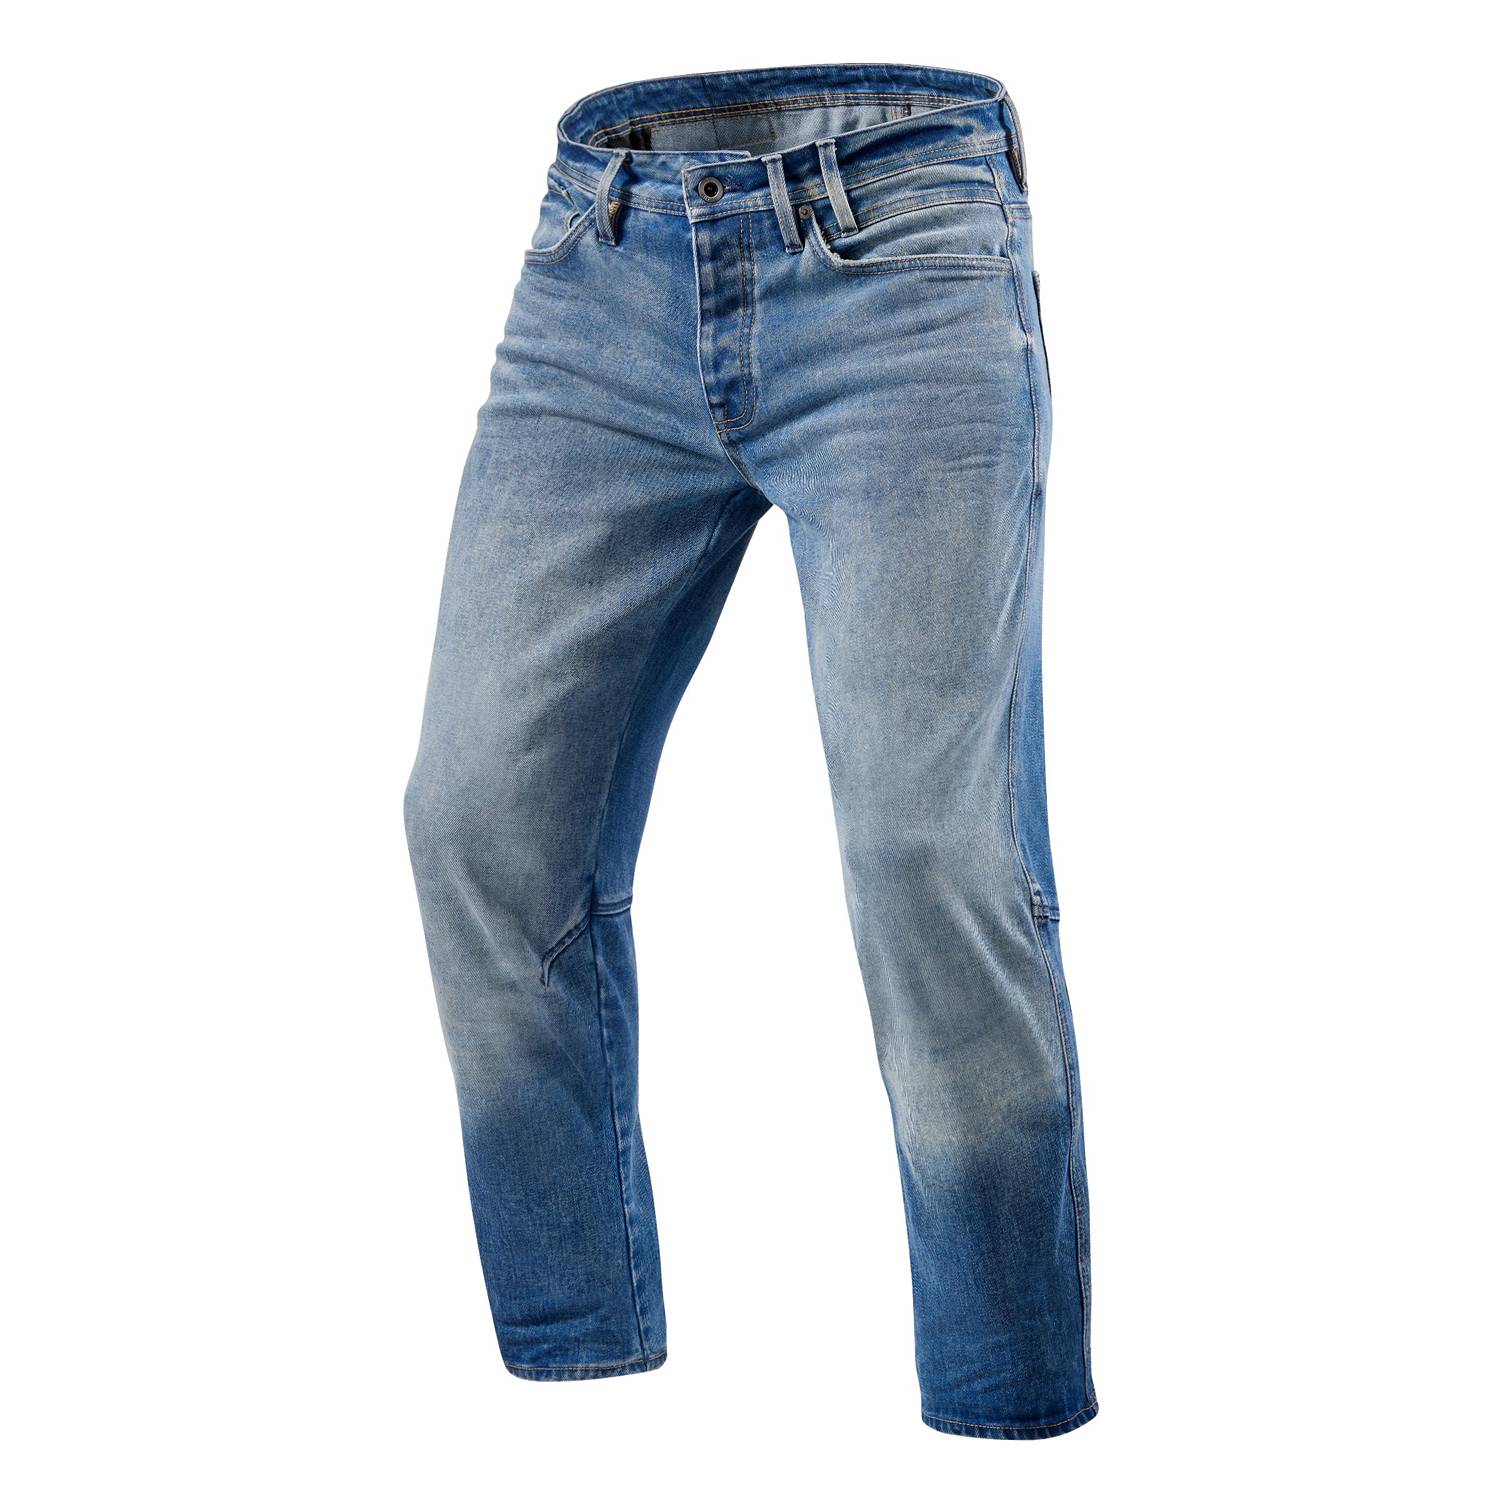 Image of REV'IT! Salt TF Mid Blue Used Motorcycle Jeans Talla L36/W30